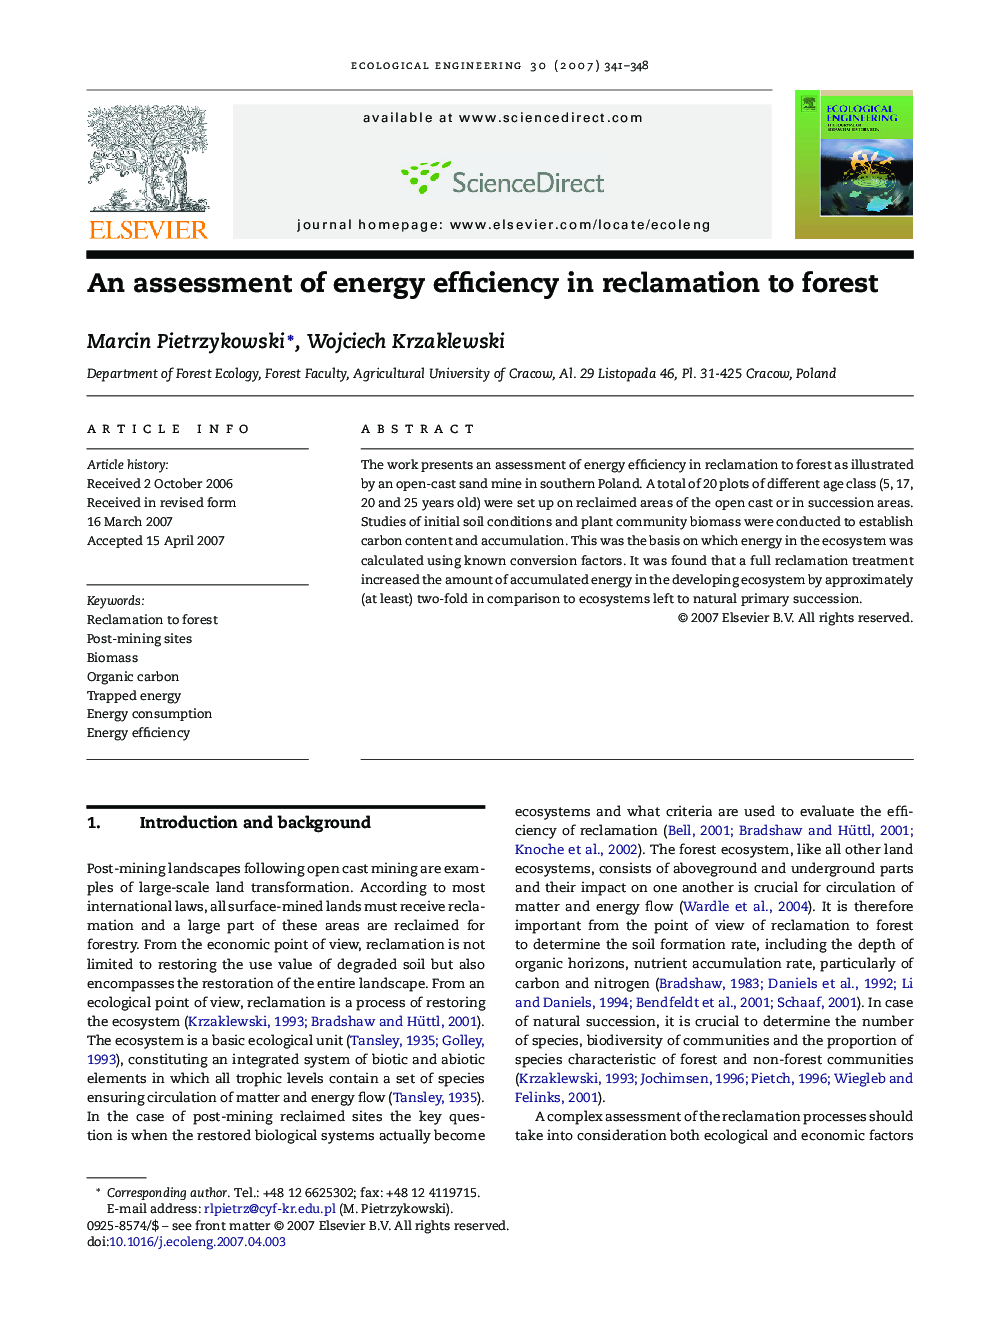 An assessment of energy efficiency in reclamation to forest